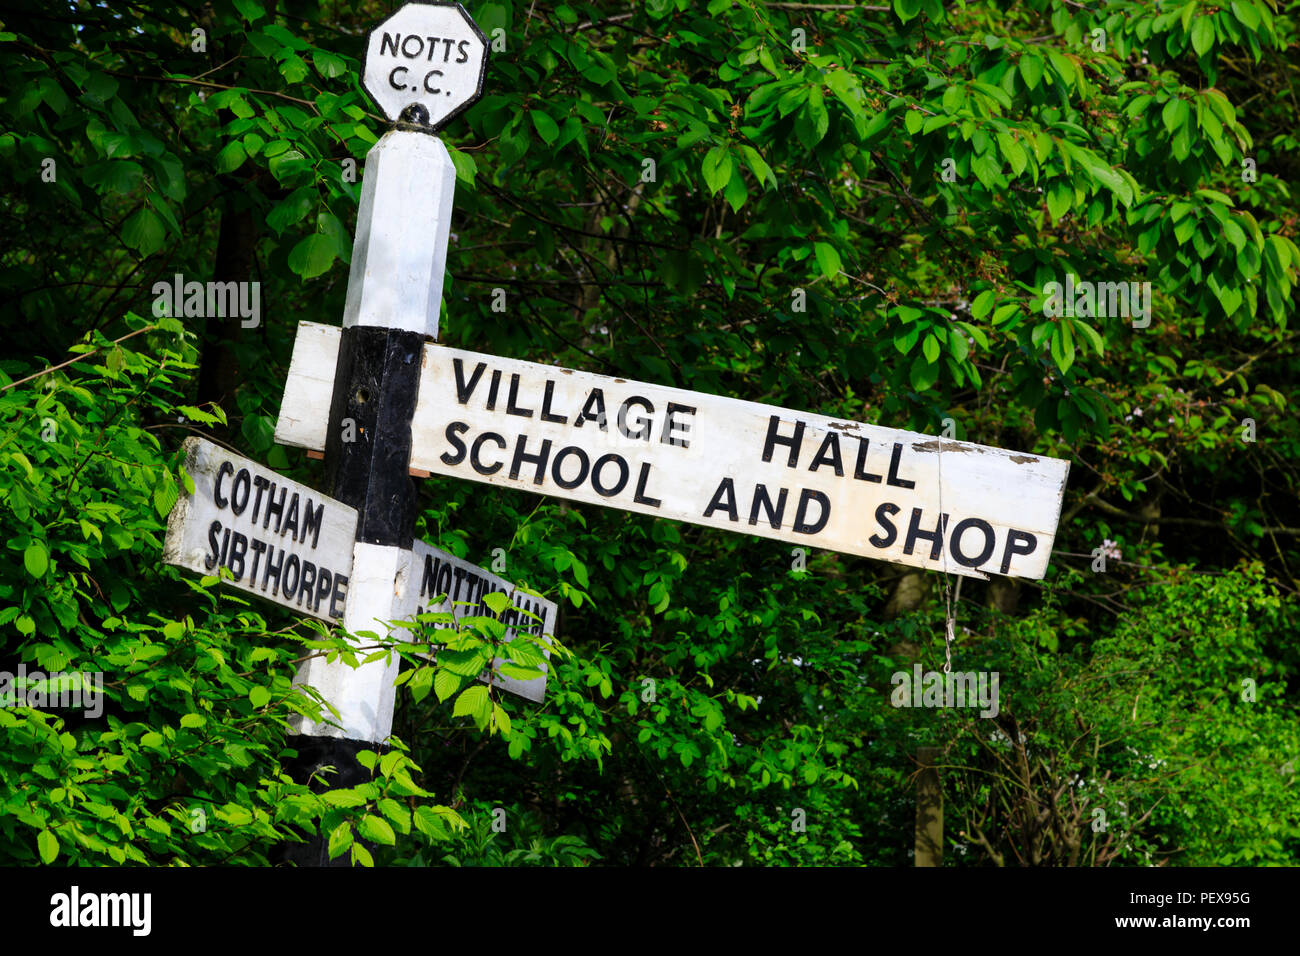 Old British road sign for the village hall, school and shop in Elston, Nottinghamshire, England. Stock Photo